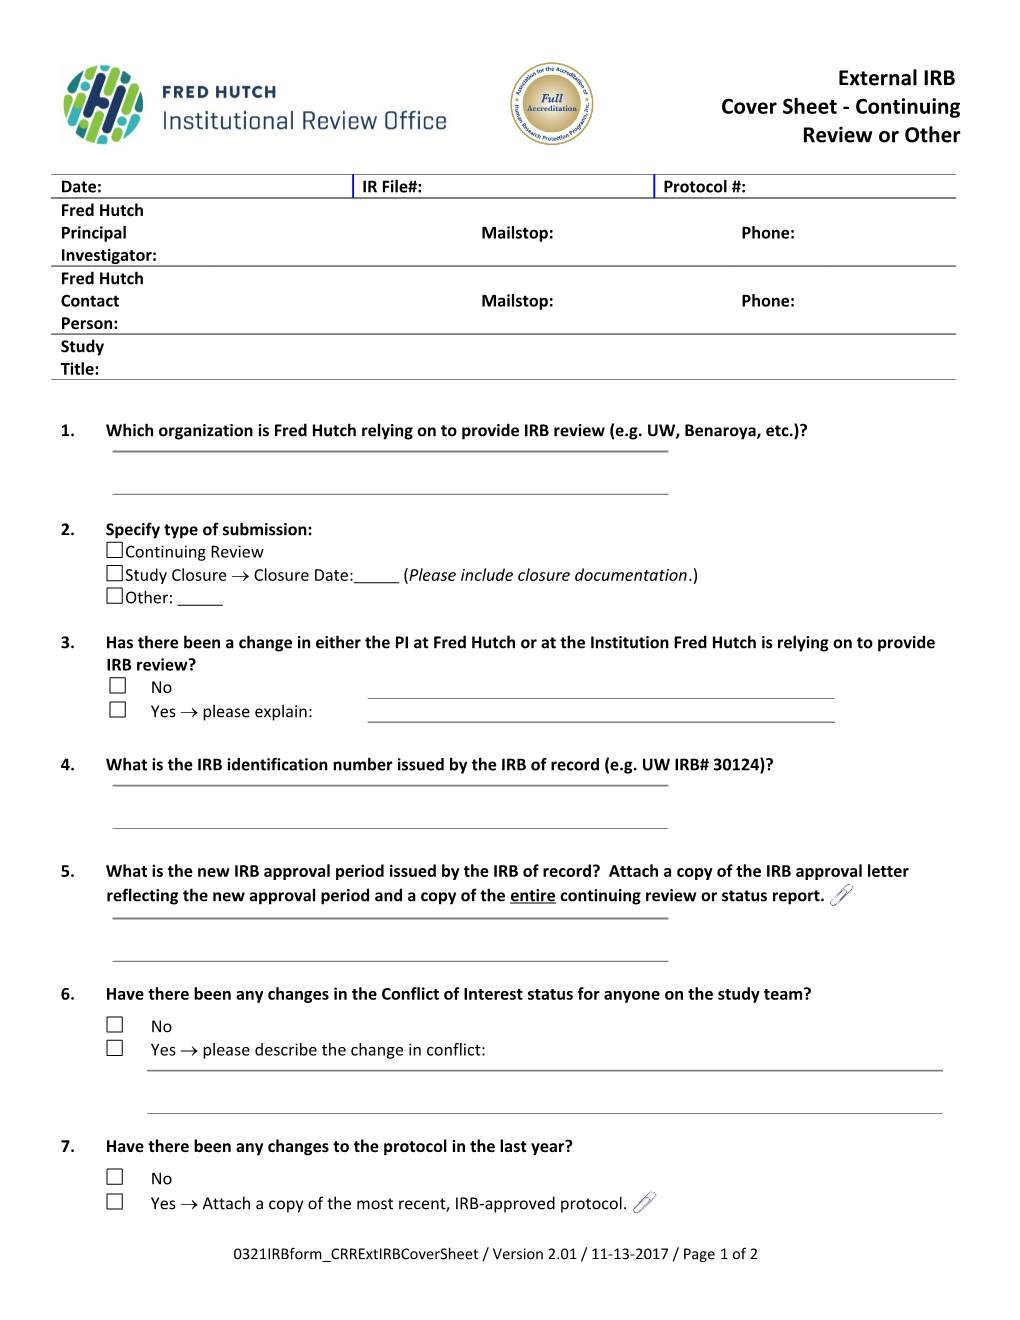 IRB Form External IRB Cover Sheet - Continuing Review Or Other